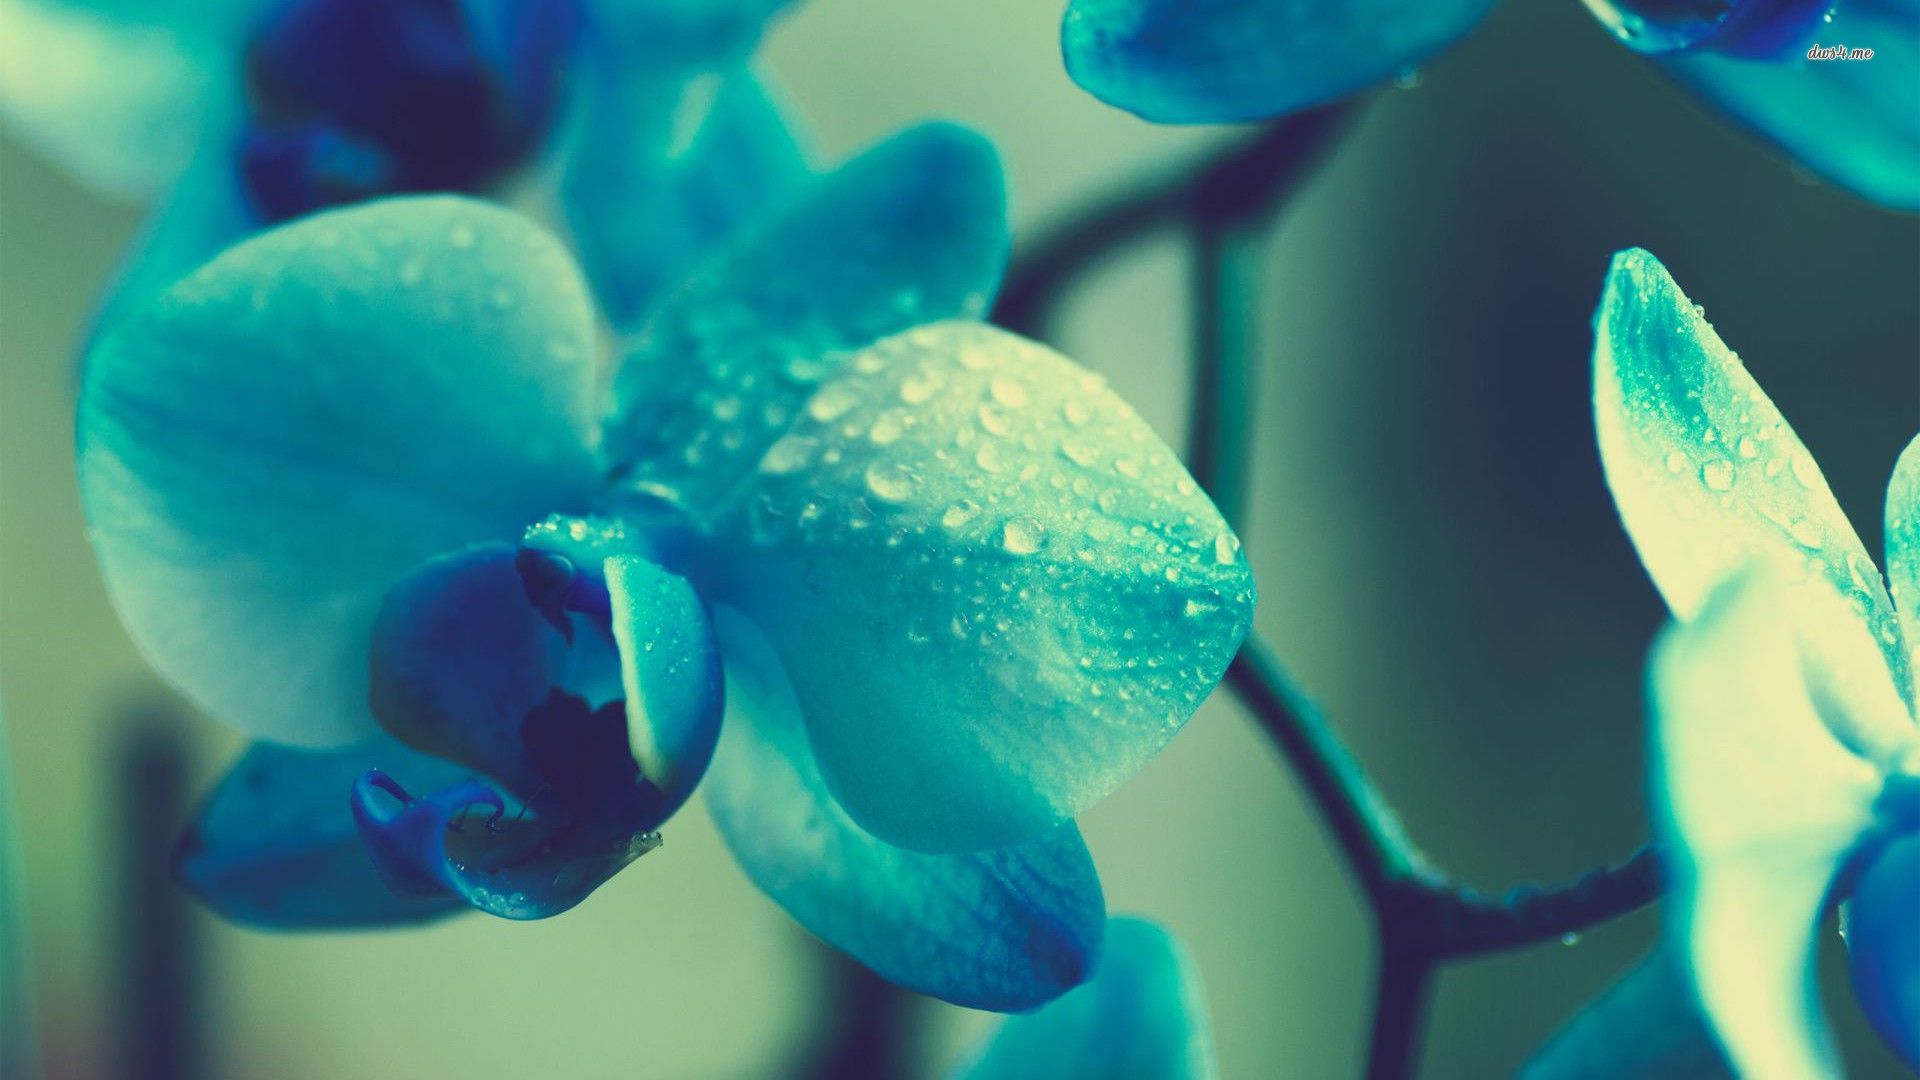 26566 Wet Orch - Blue Orchid Hd - HD Wallpaper 